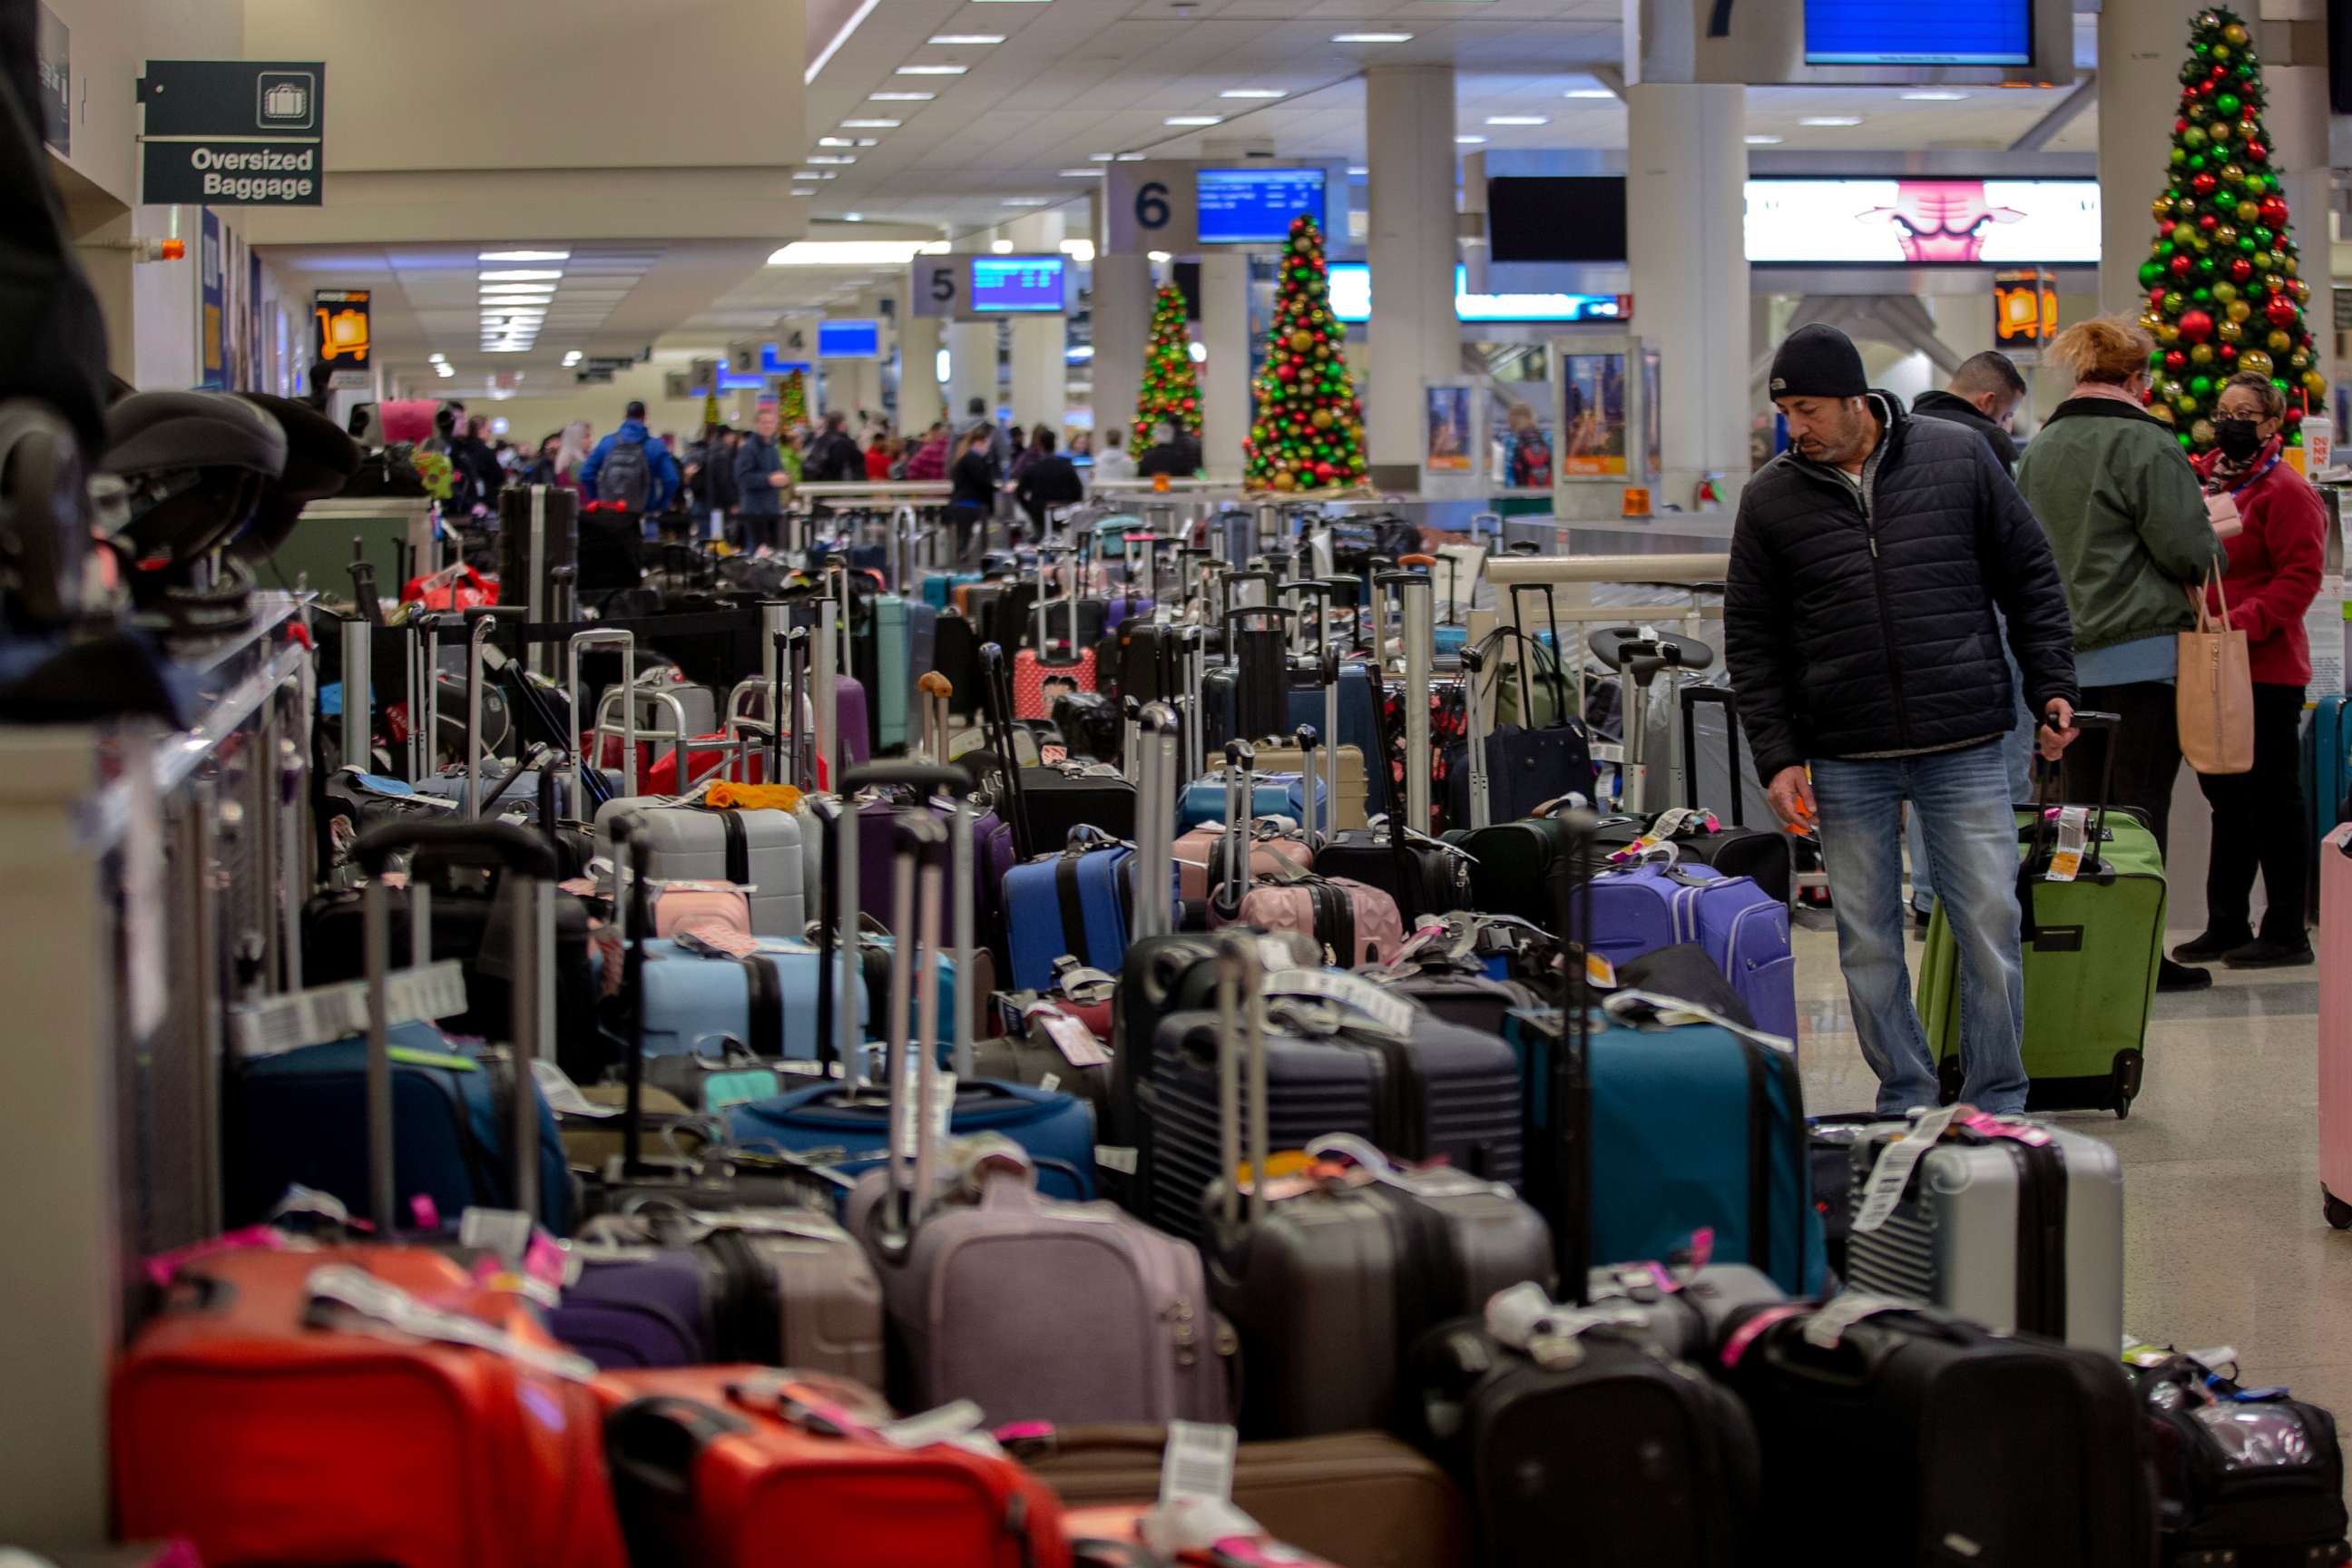 PHOTO: Stranded travelers search for their luggage at the Southwest Airlines Baggage Claim at Midway Airport on Dec. 27, 2022 in Chicago.